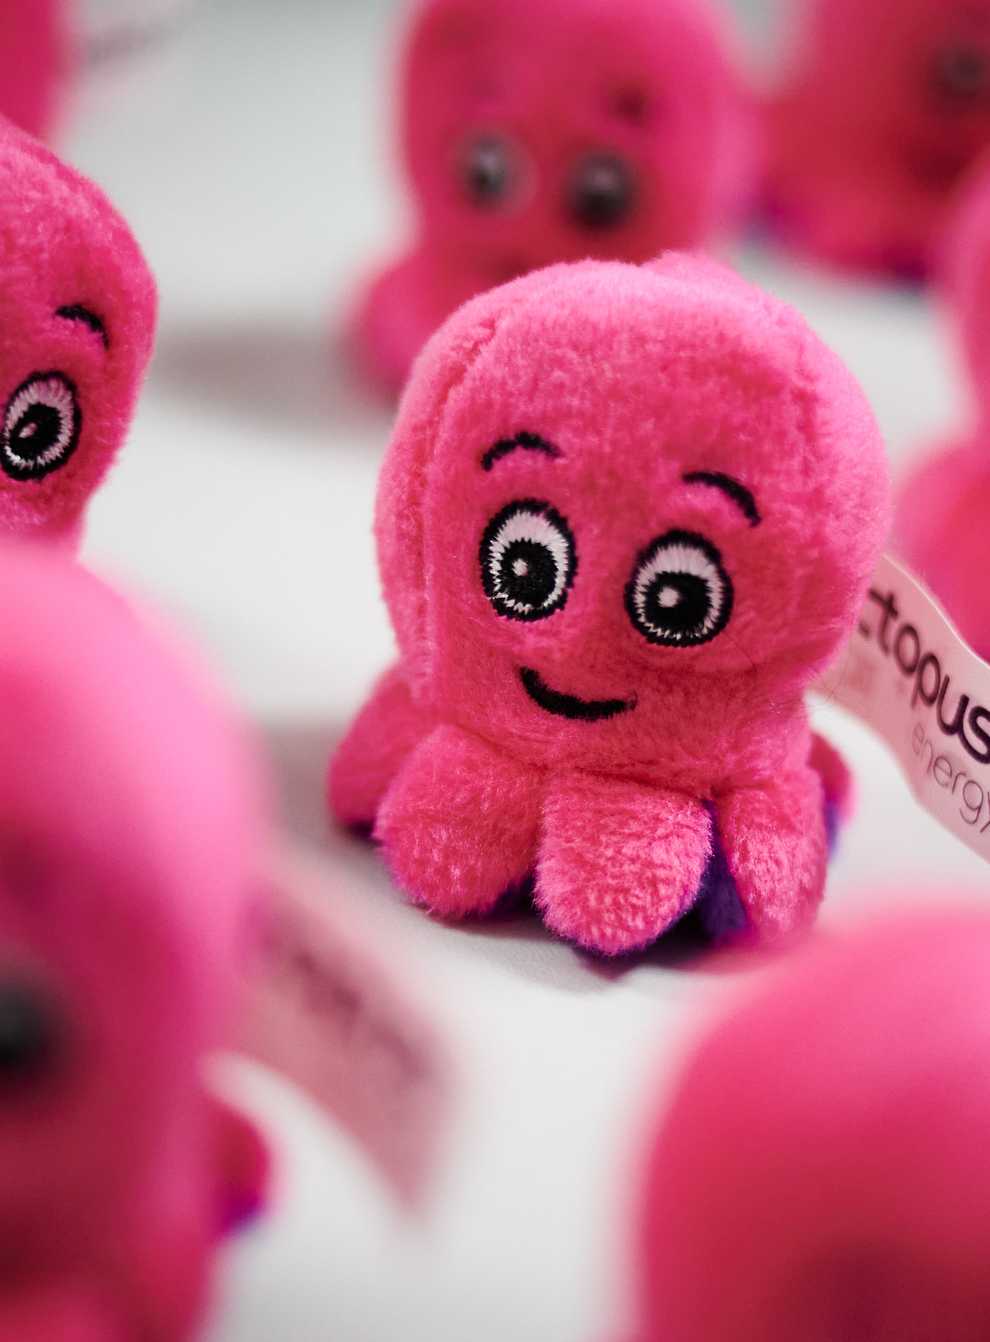 Octopus Energy promotional toys at the headquarters of Octopus Energy in London (PA)